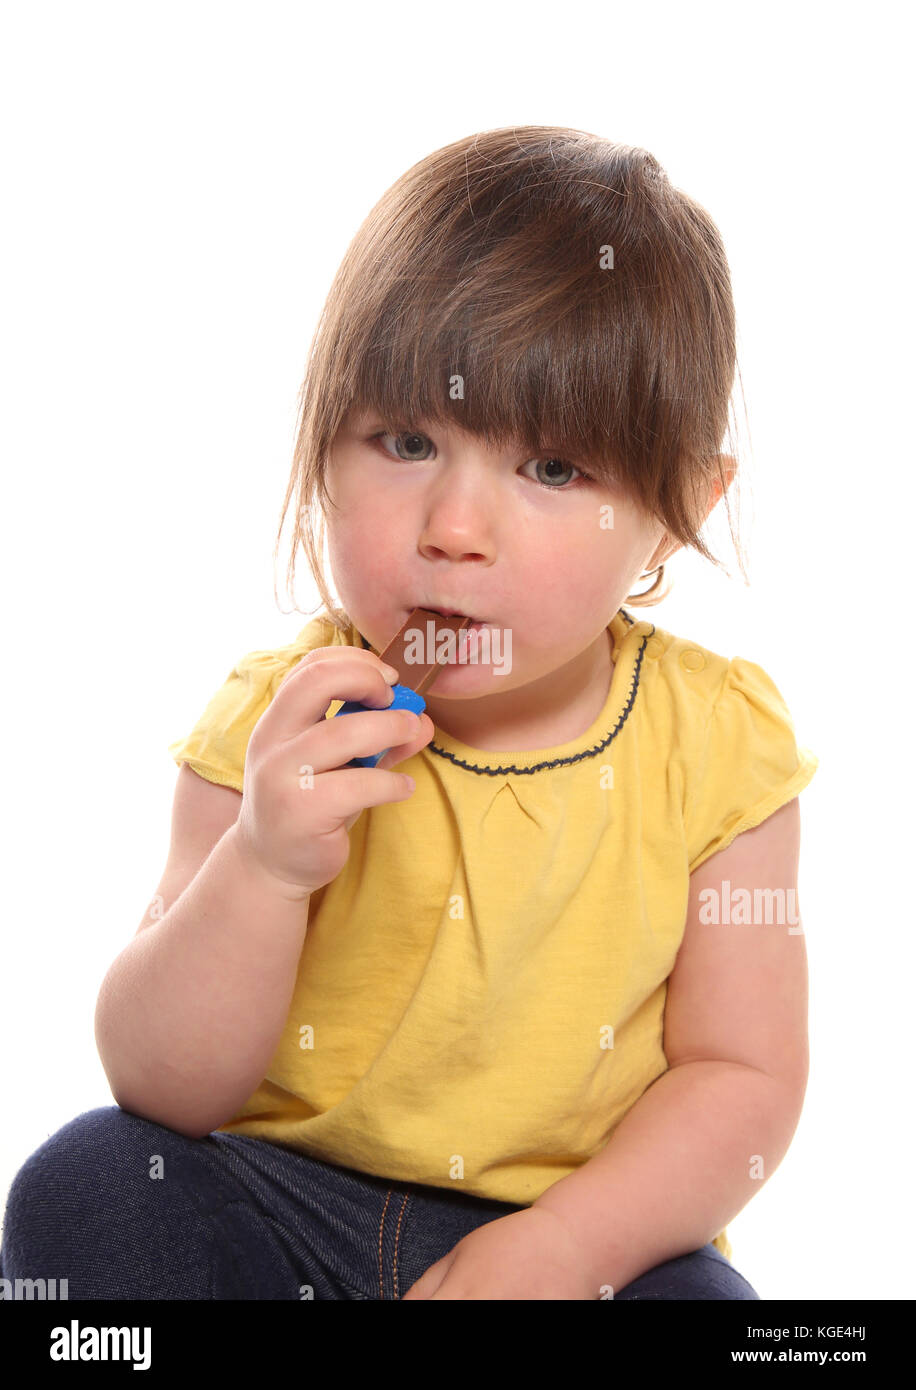 two year old girl eating chocolate in studio Stock Photo